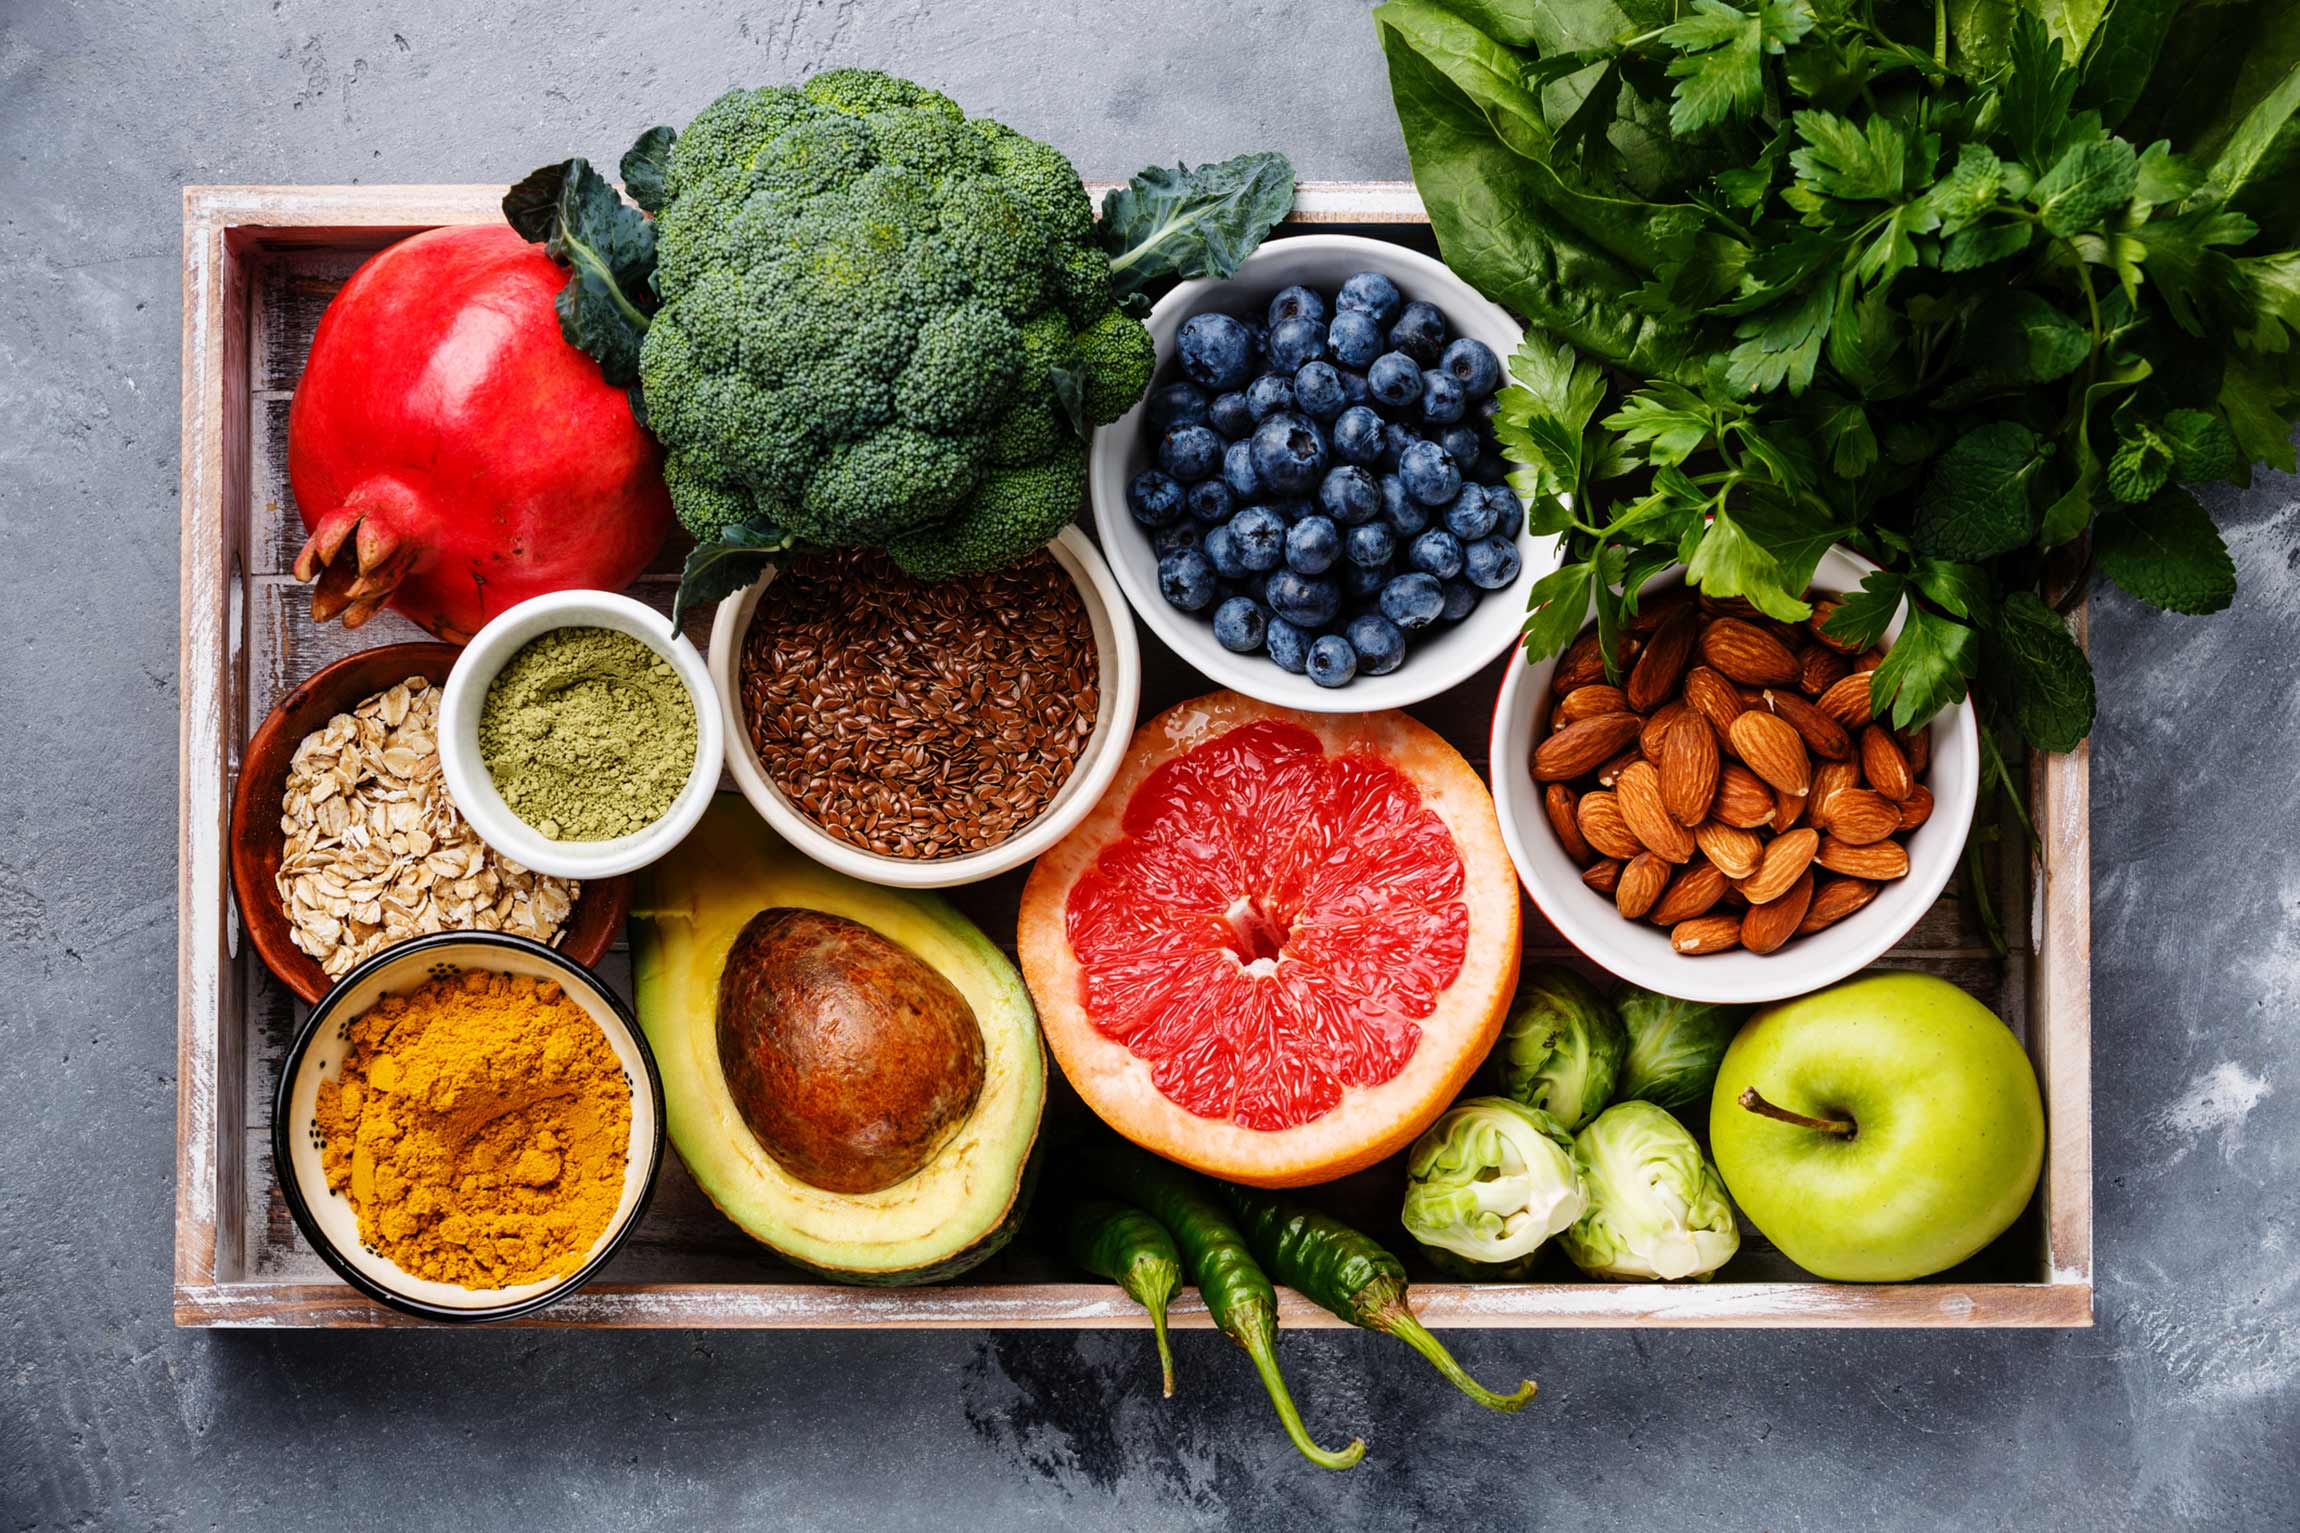 A tray full of fruits, vegetables, nuts, grains, and spices